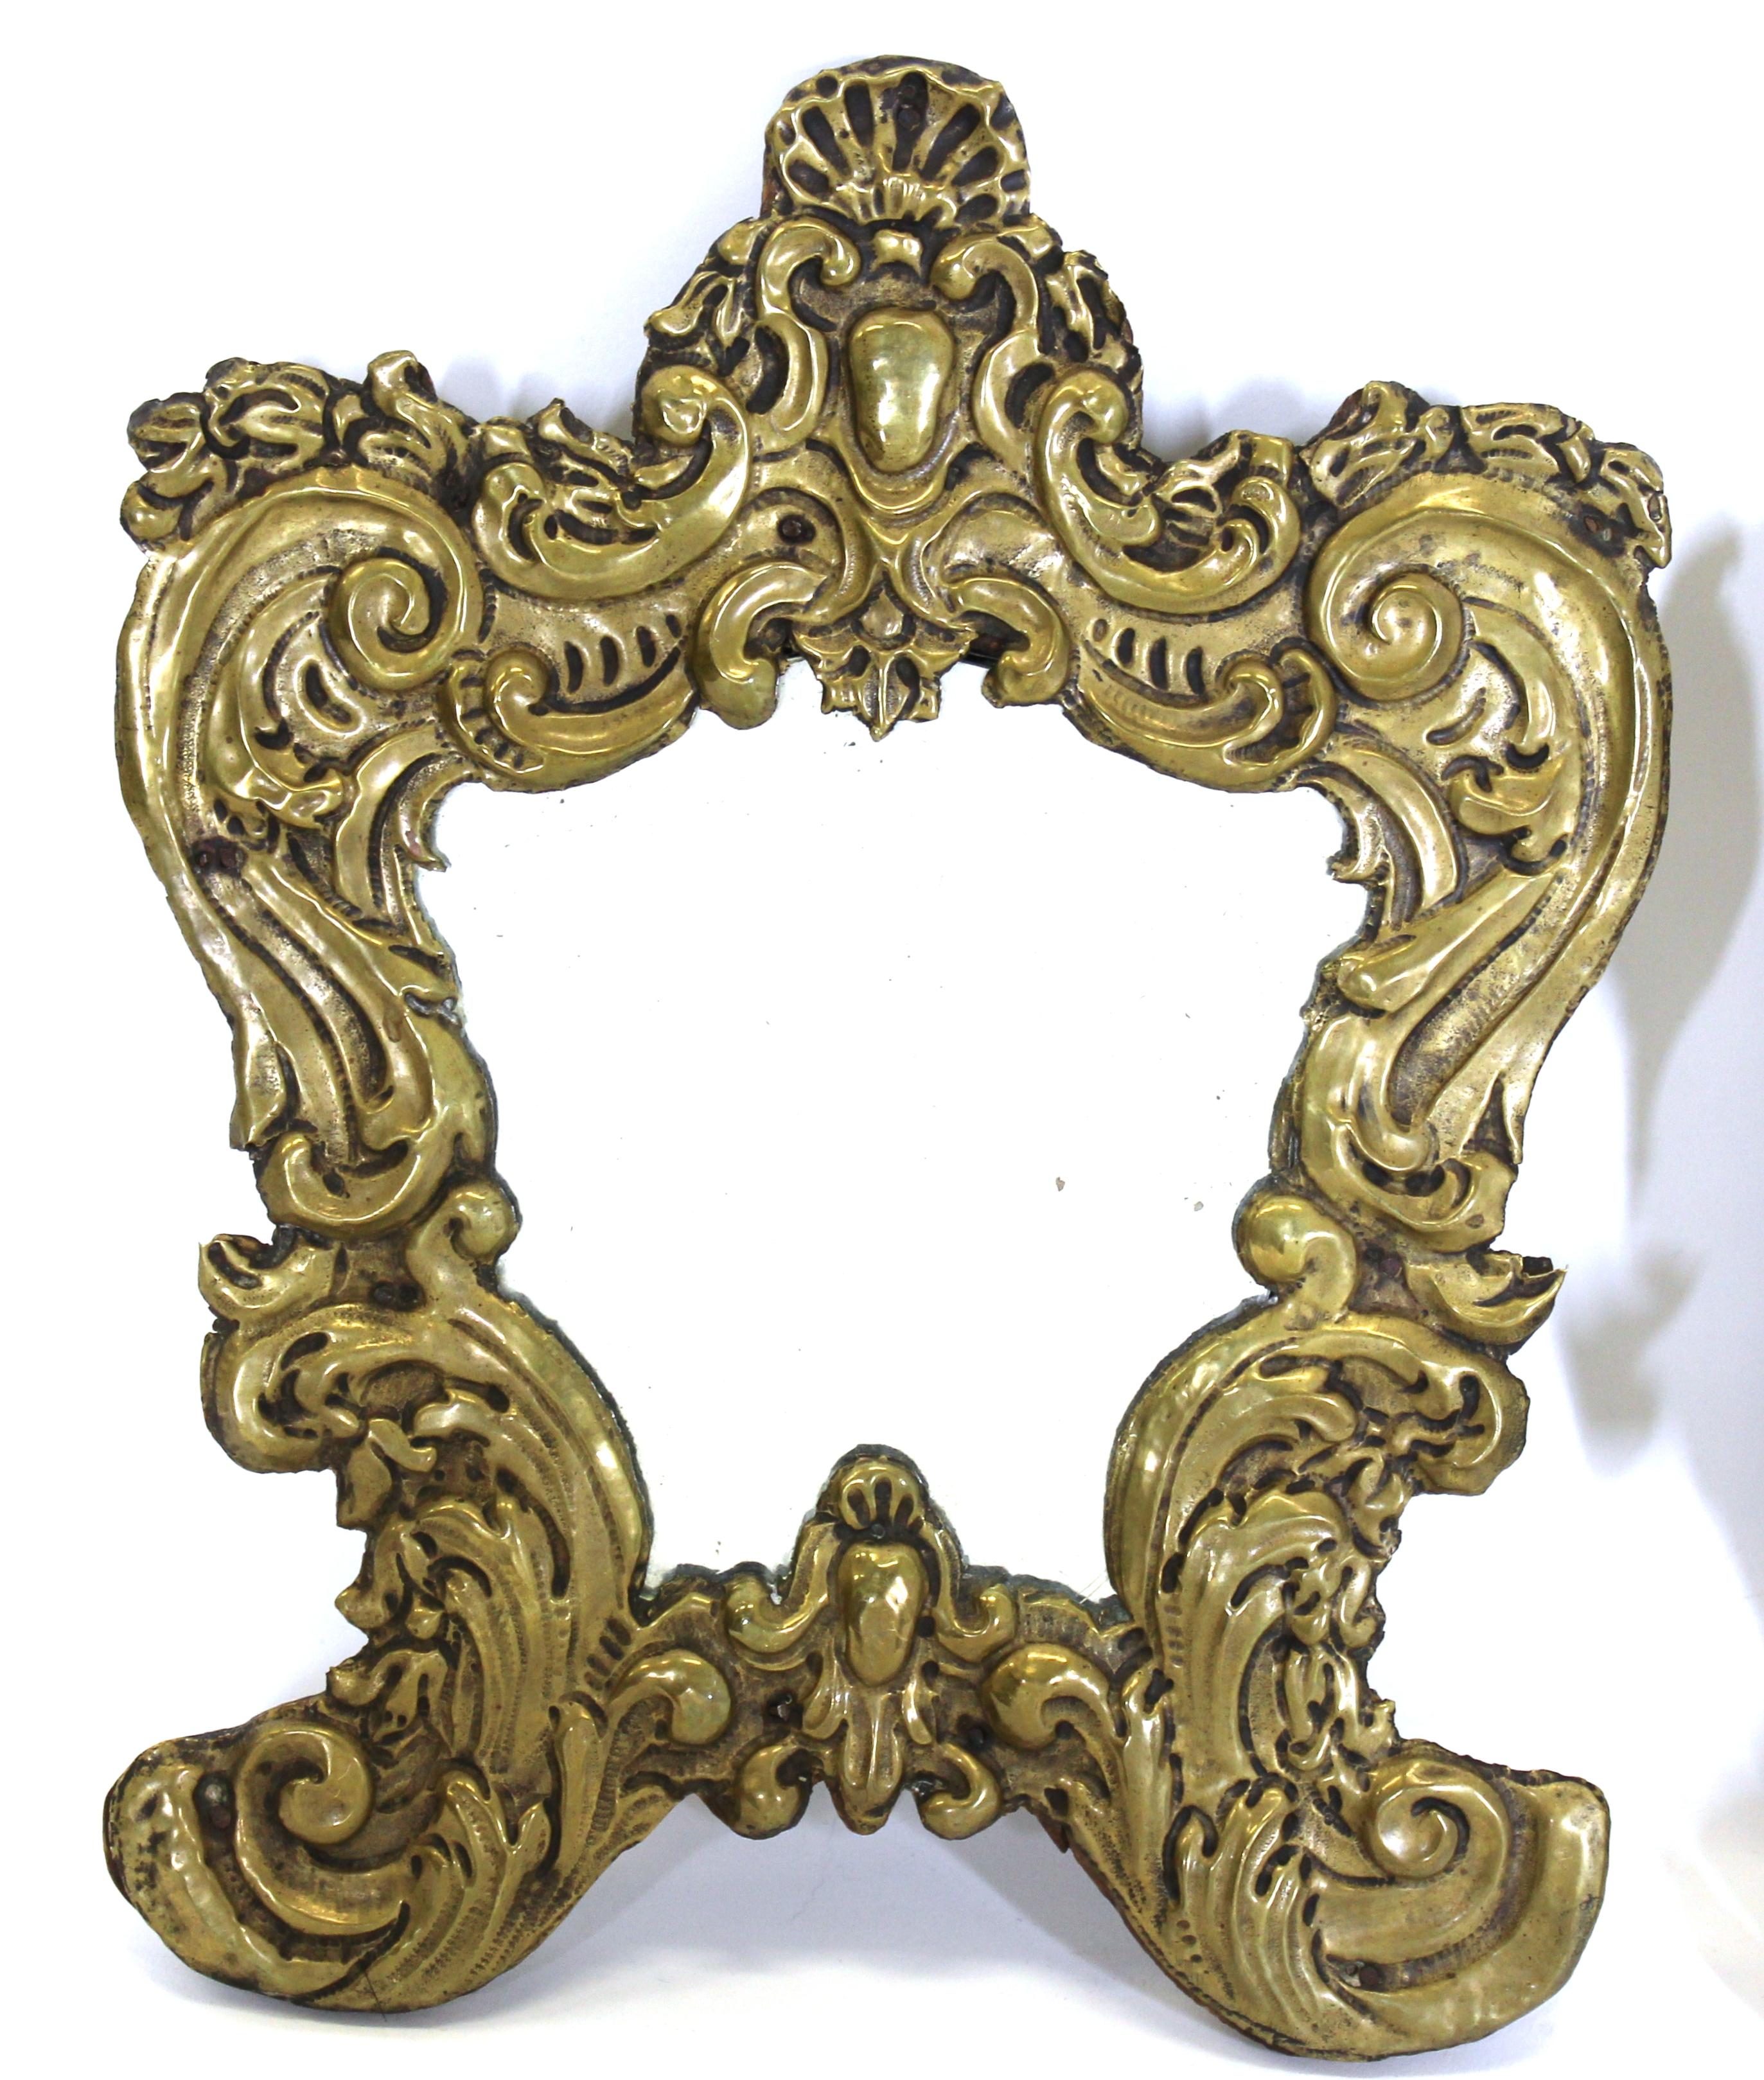 Italian Rococo pair of diminutive mirrors with repousse brass mounted on carved and painted wood. Made in the late 18th century.